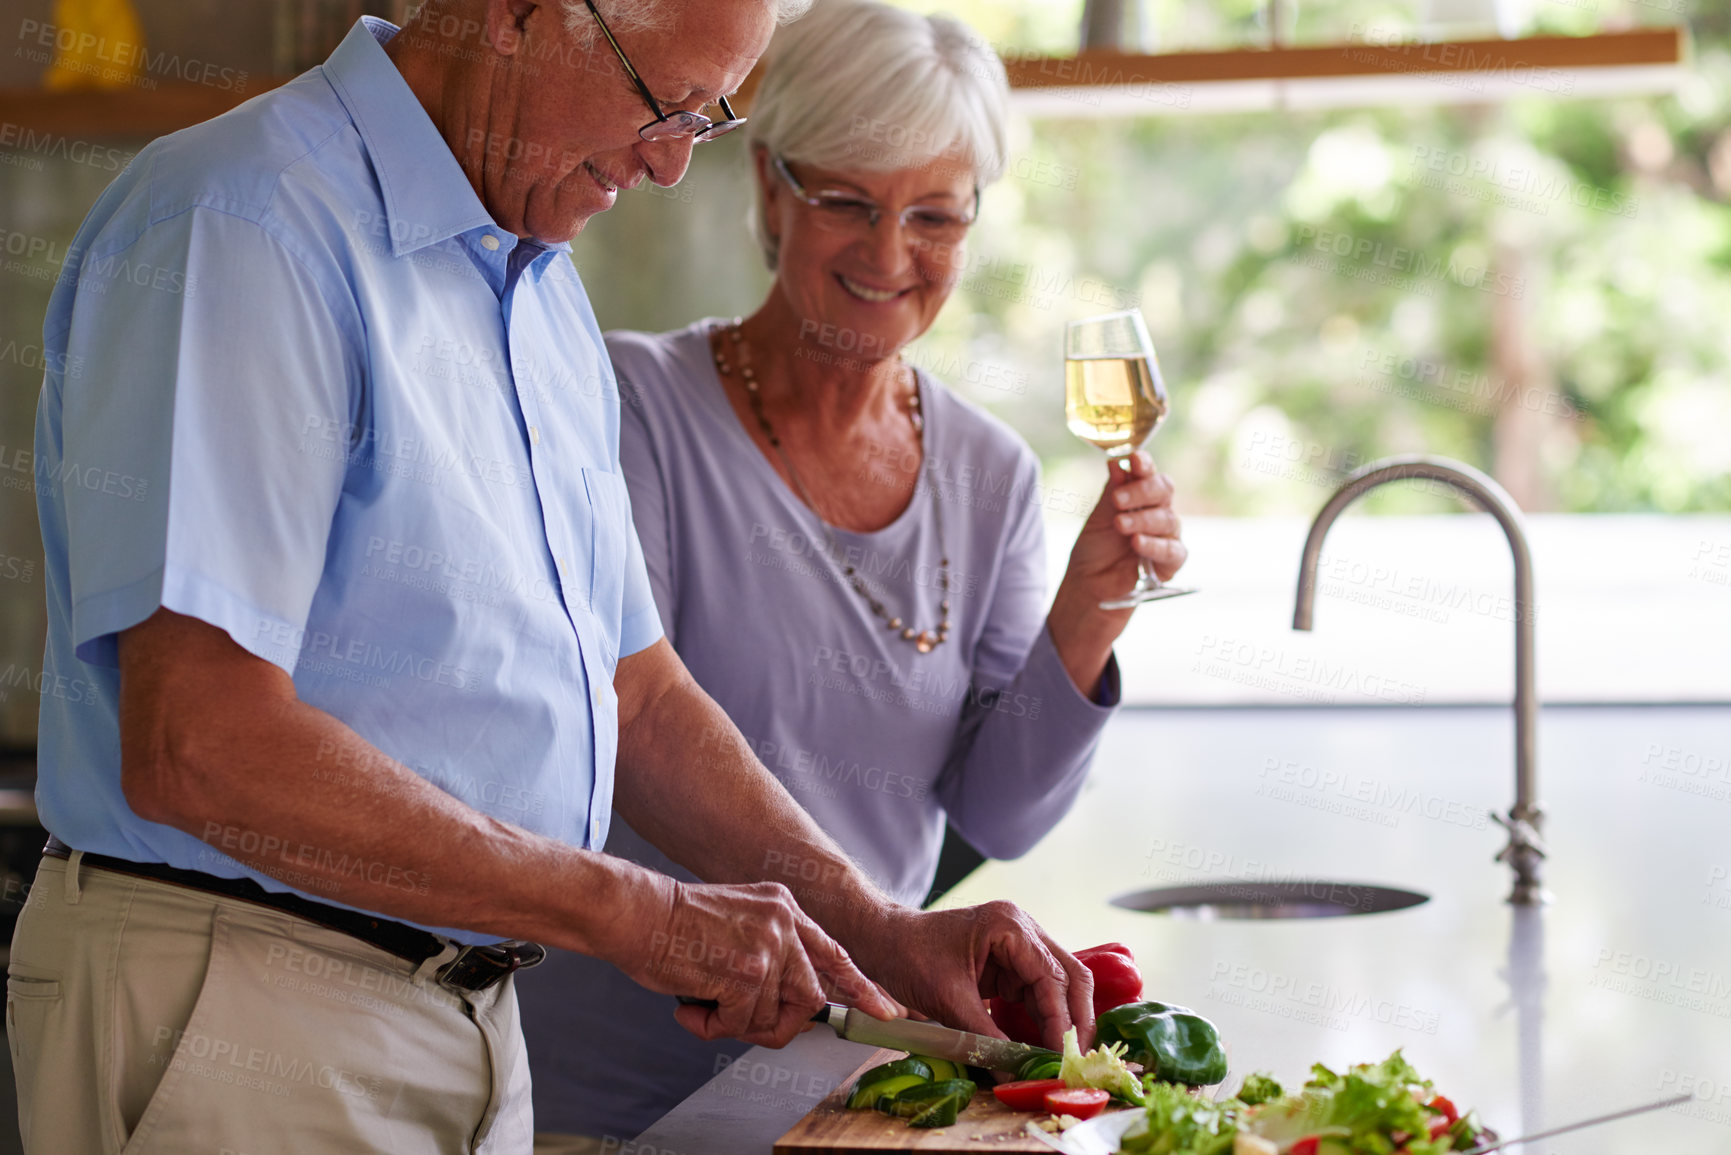 Buy stock photo Shot of a senior couple preparing a meal in their kitchen